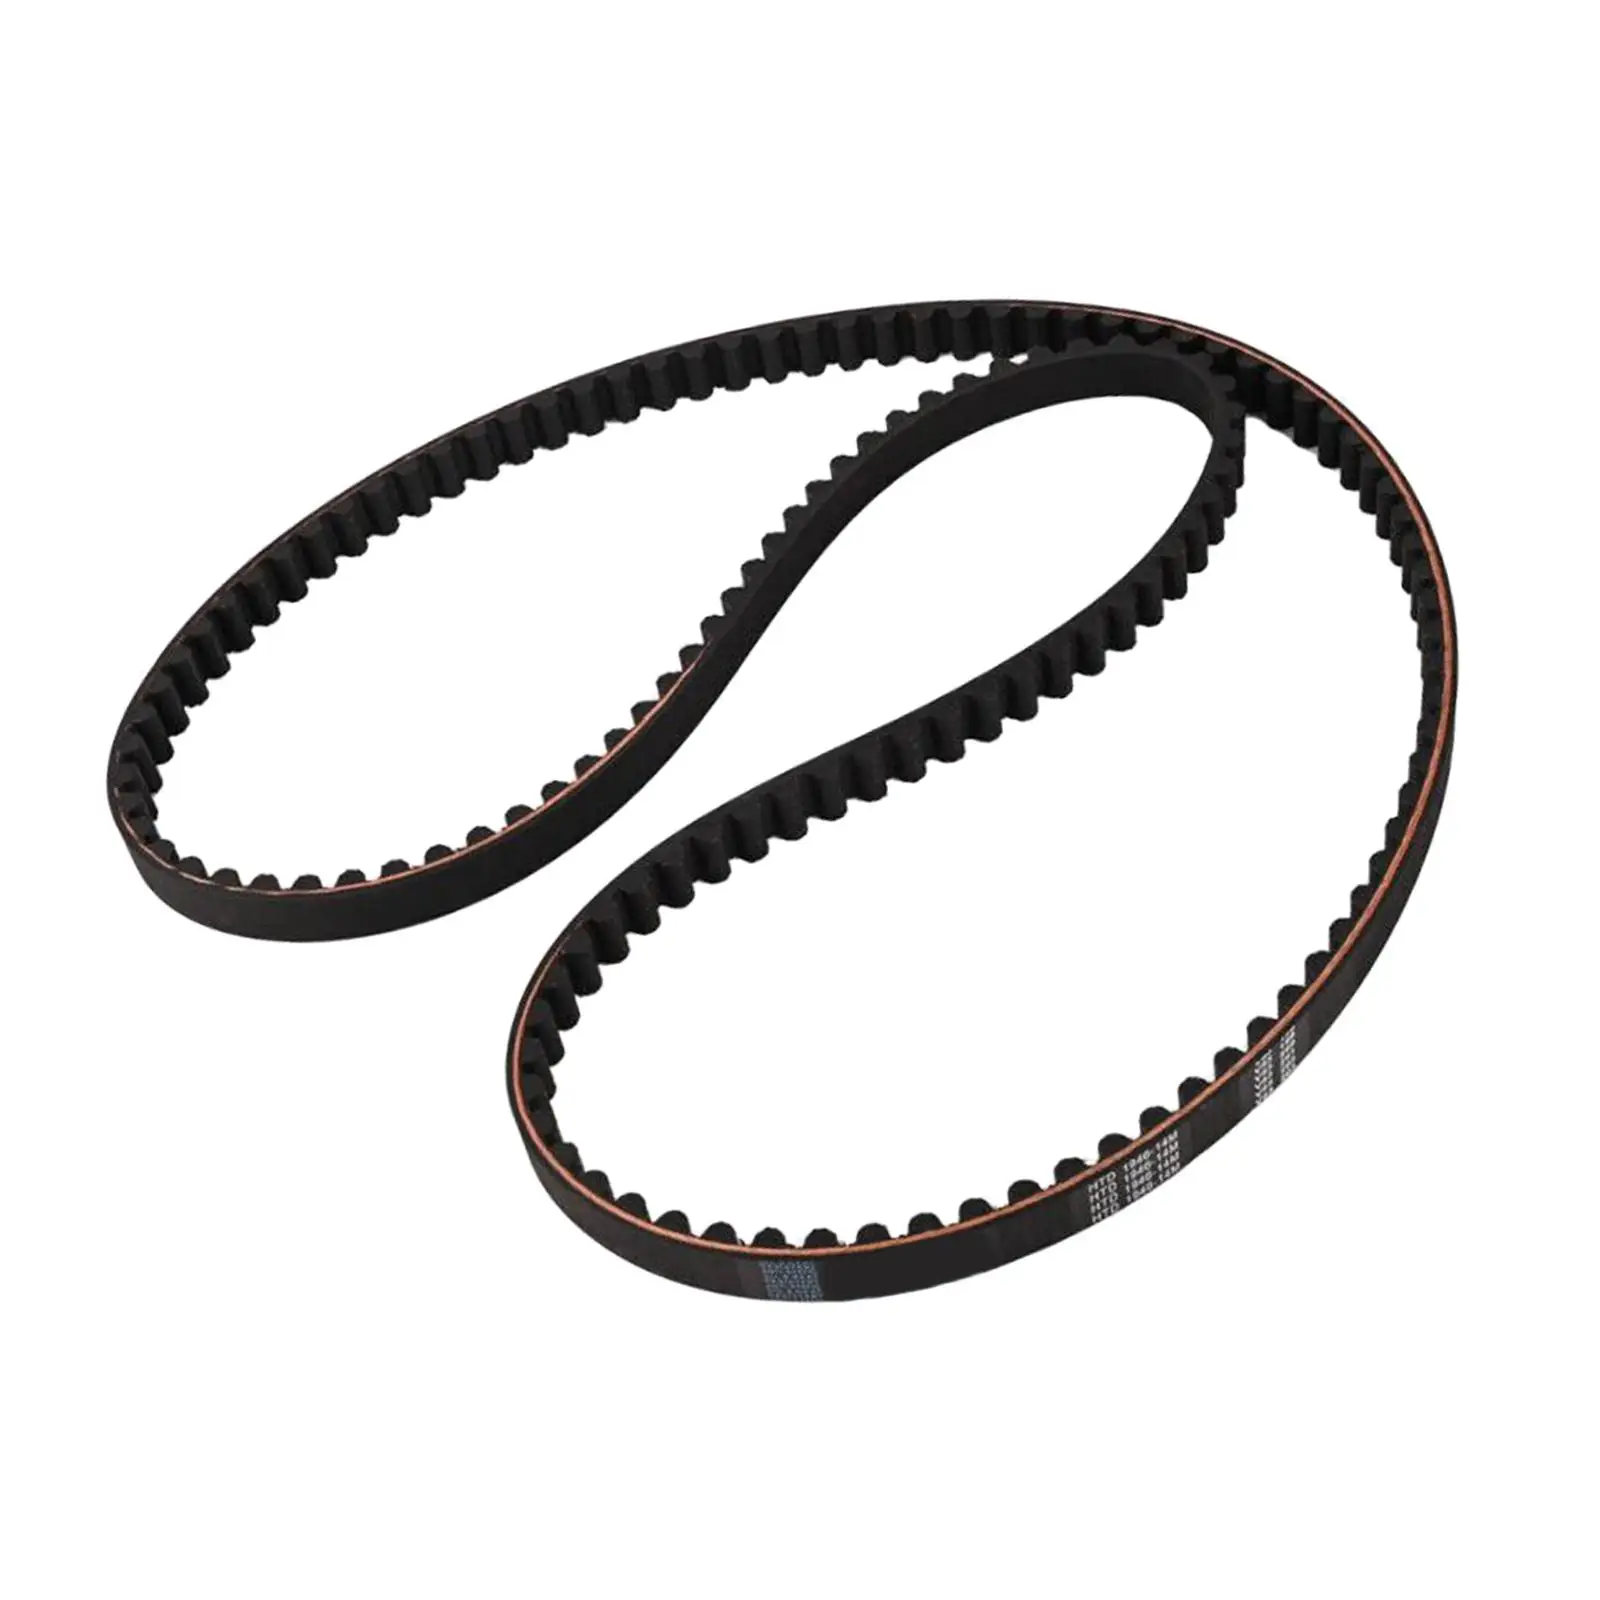 Rear Drive Belt Easy Installation Replacement 133 Tooth Assembly Professional 1204-0053 for Harley Softail FX fl 2007-2011